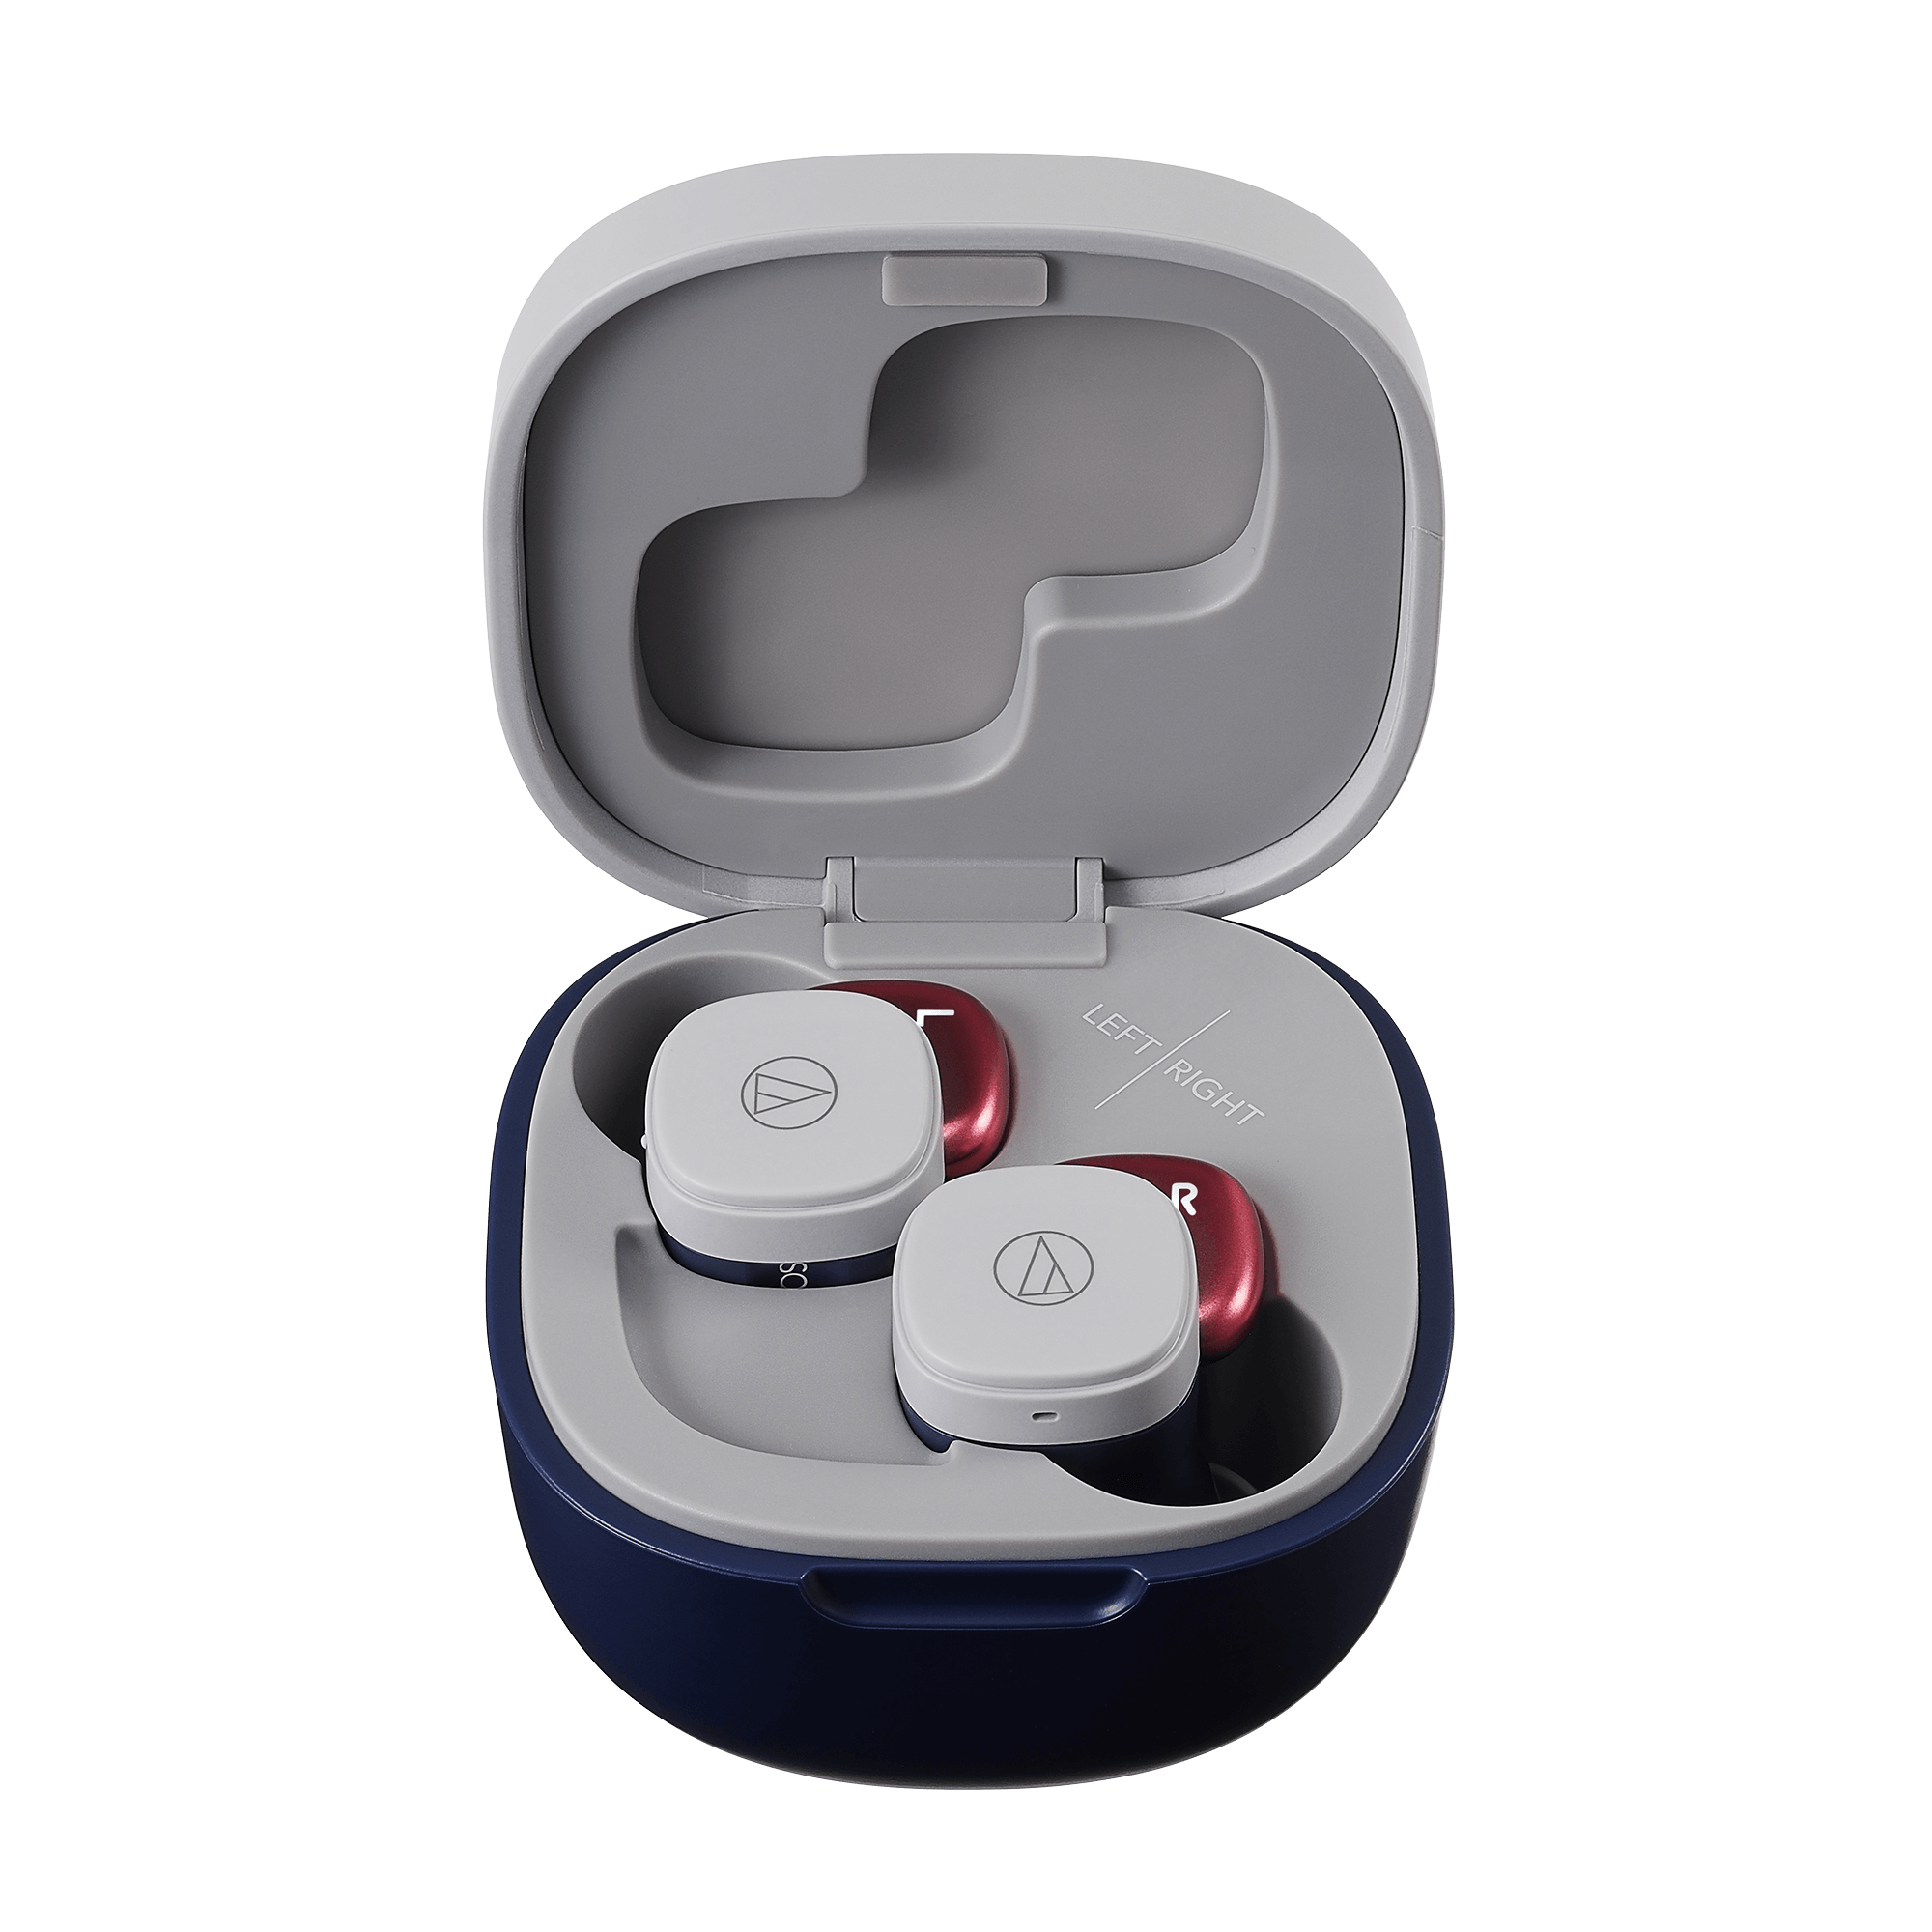 The Audio-Technica ATH-SQ1TW earbuds in their charging case